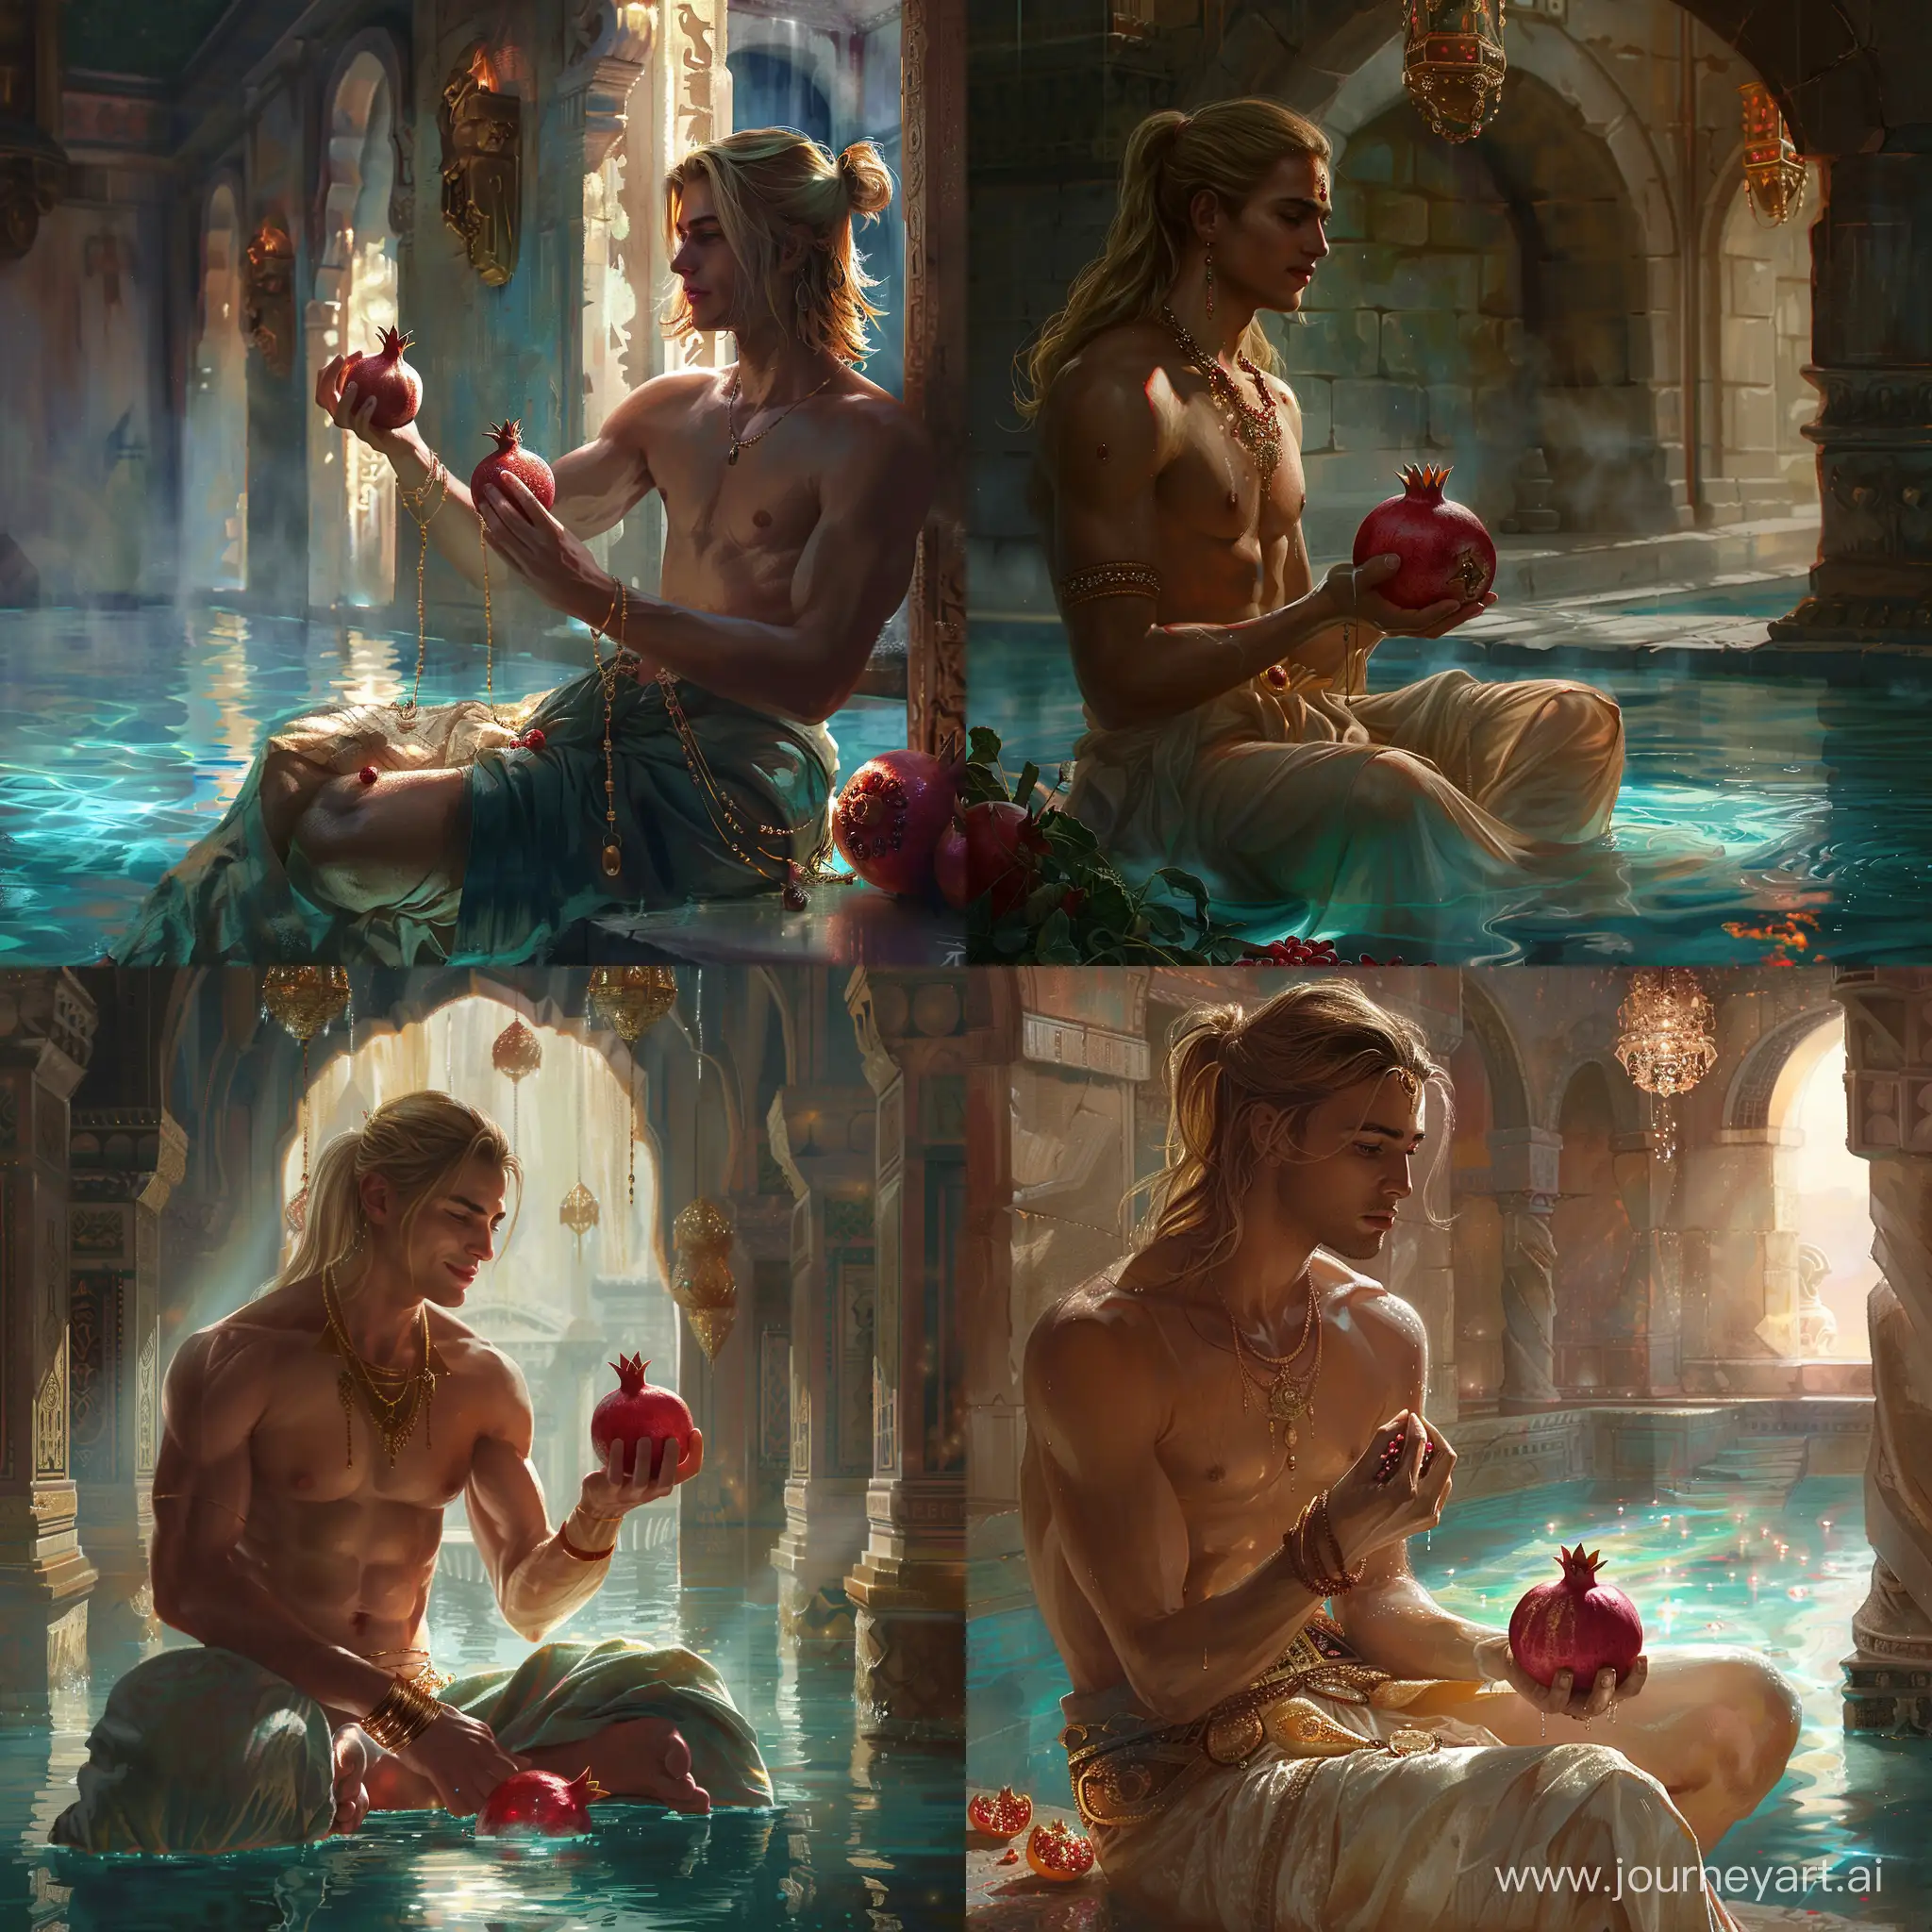 Graceful-Shirtless-Man-Holding-Pomegranate-in-Ancient-Pool-with-Magical-Glow